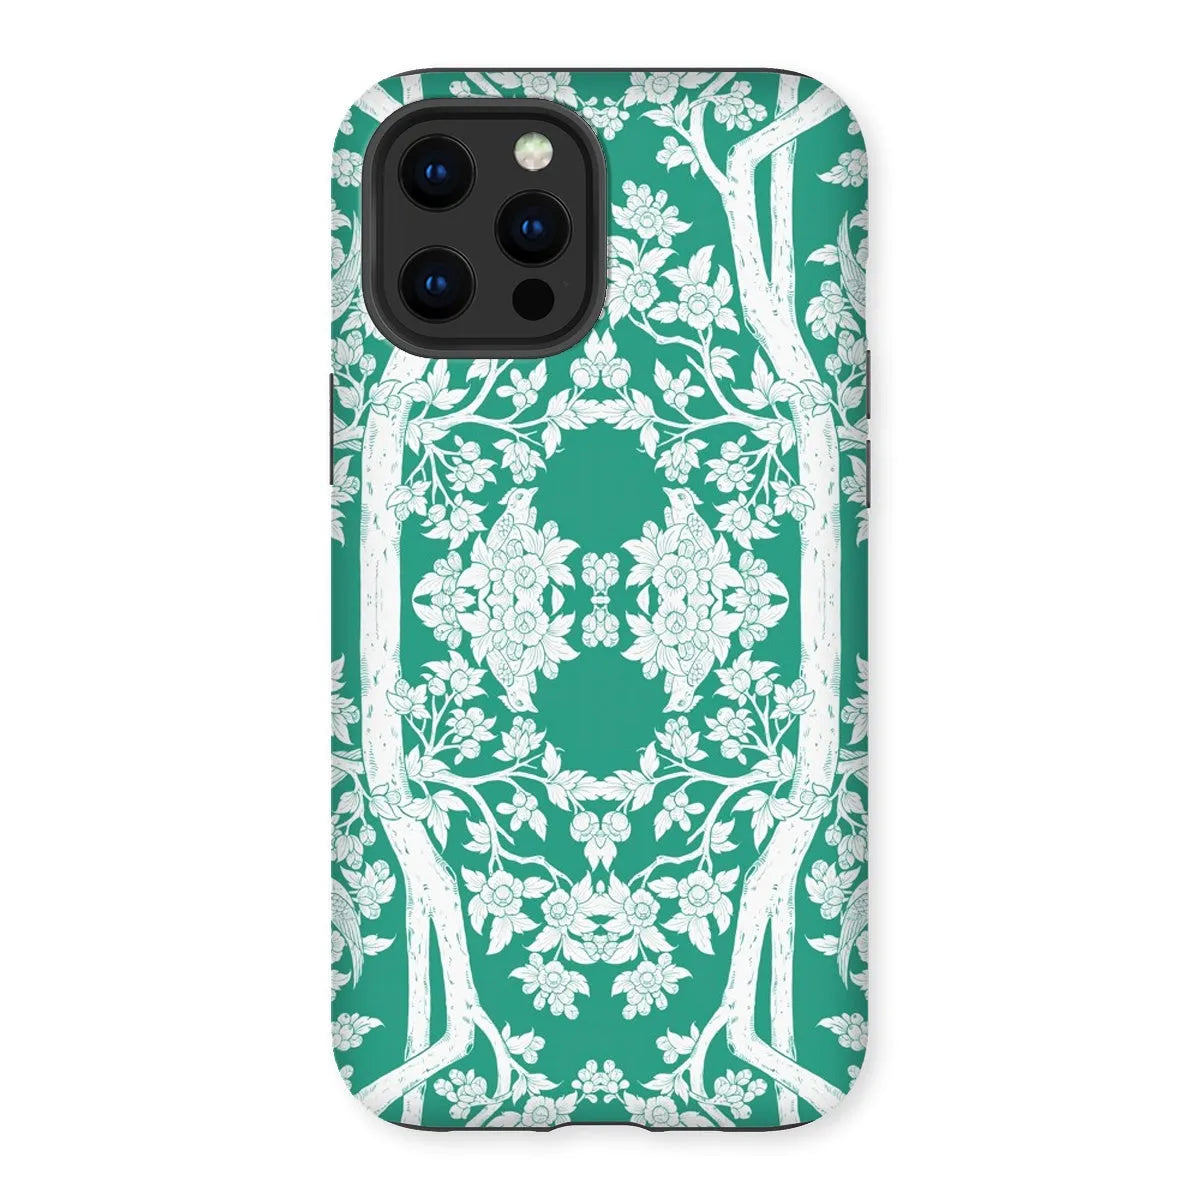 Aviary Green Aesthetic Pattern Art Phone Case - Iphone 12 Pro Max / Matte - Mobile Phone Cases - Aesthetic Art